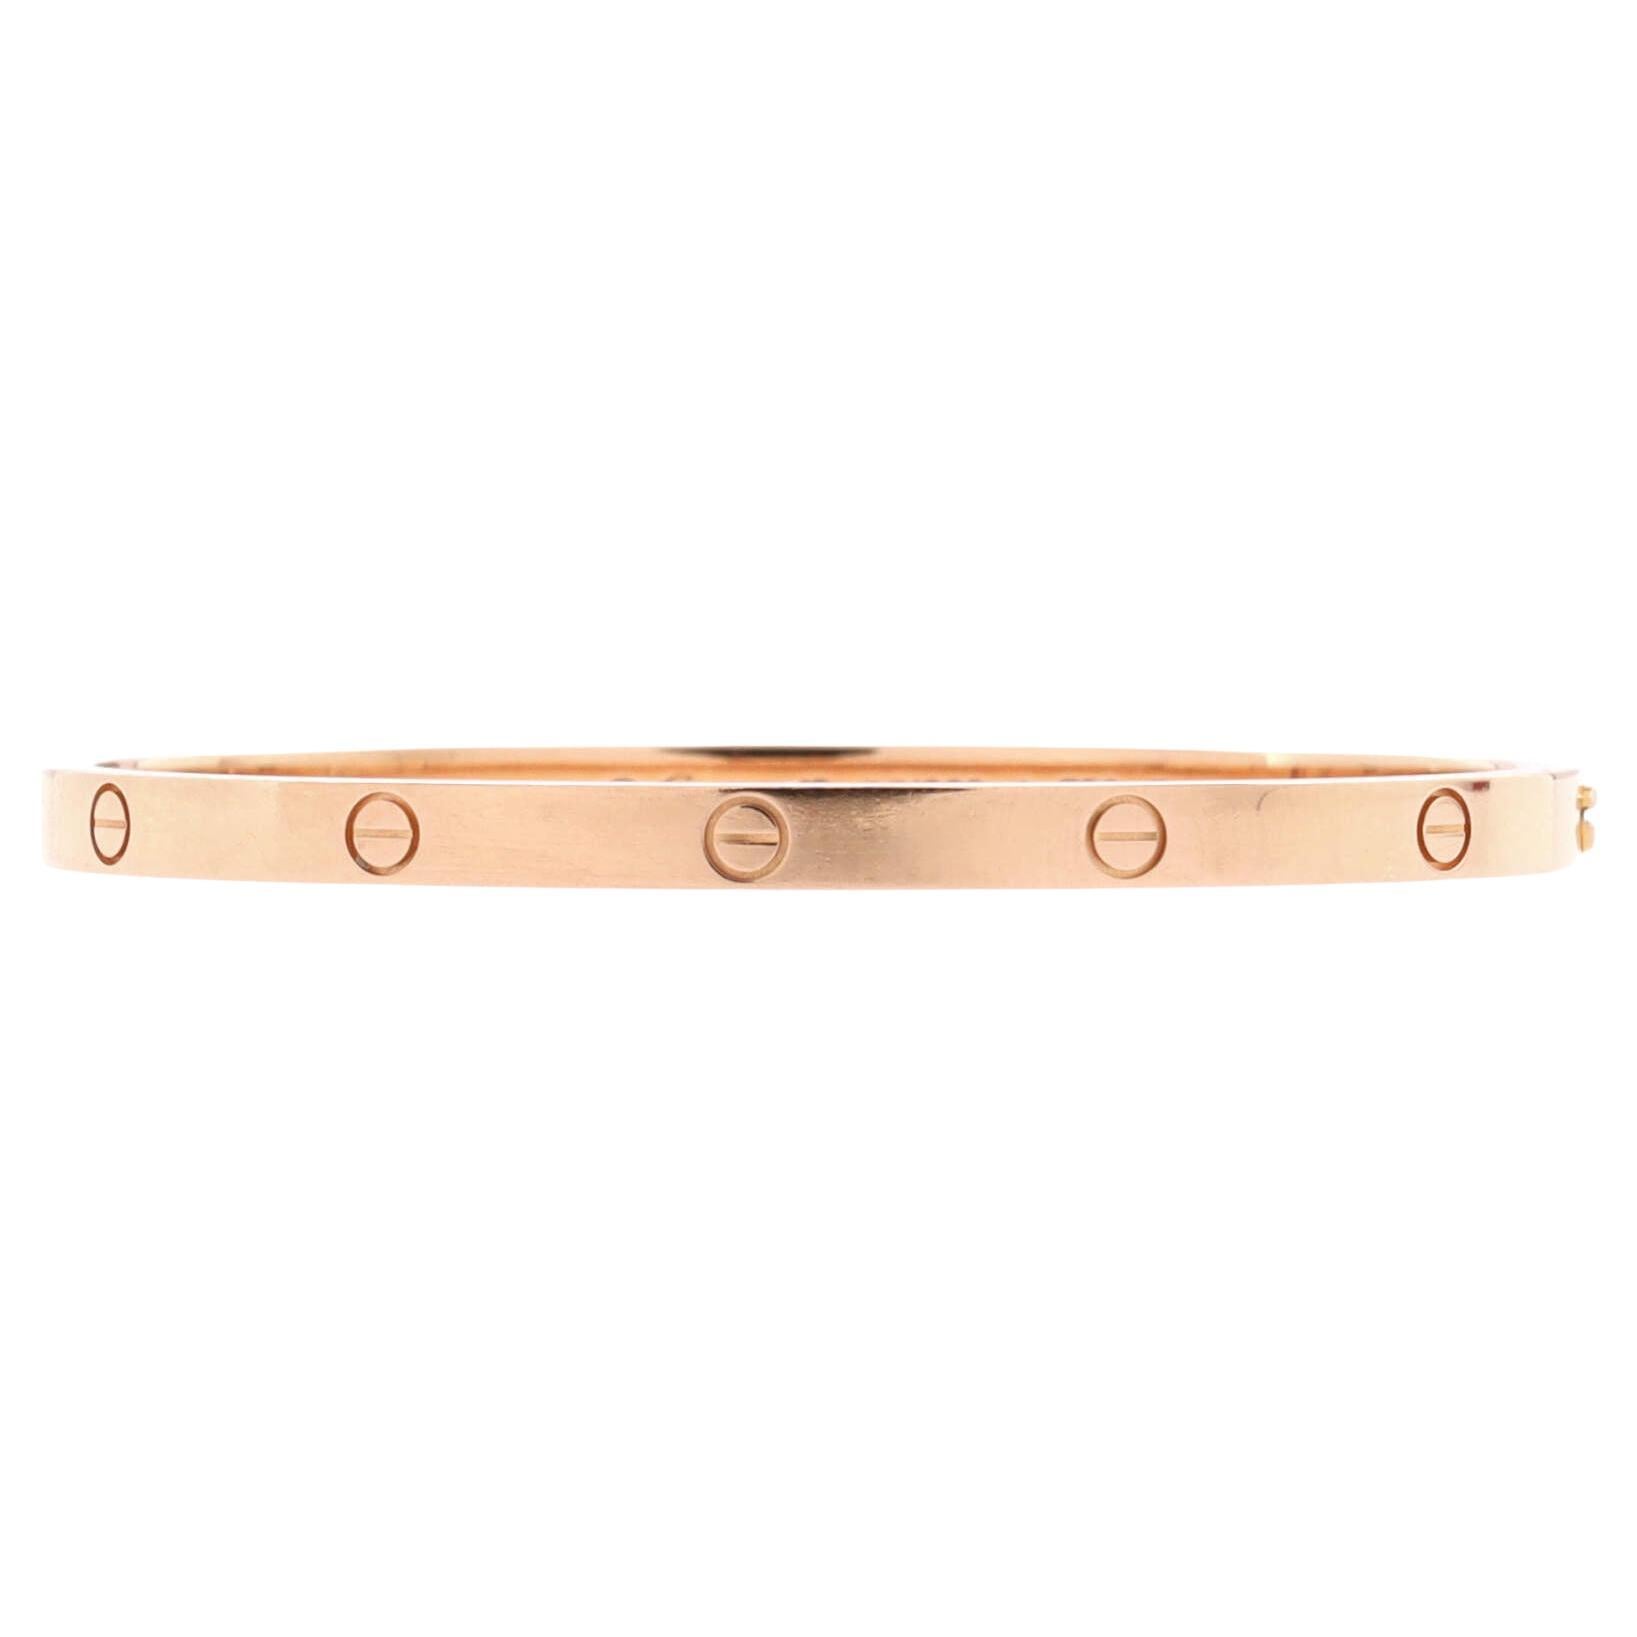 Cheap Pure 18k gold Cartier Love Bracelet, small model, 6 diamonds, weight  18-20g. – International Brand Replica Jewelry for Sale, Make in Real 18k  Gold and Diamonds, the Same As the Original.